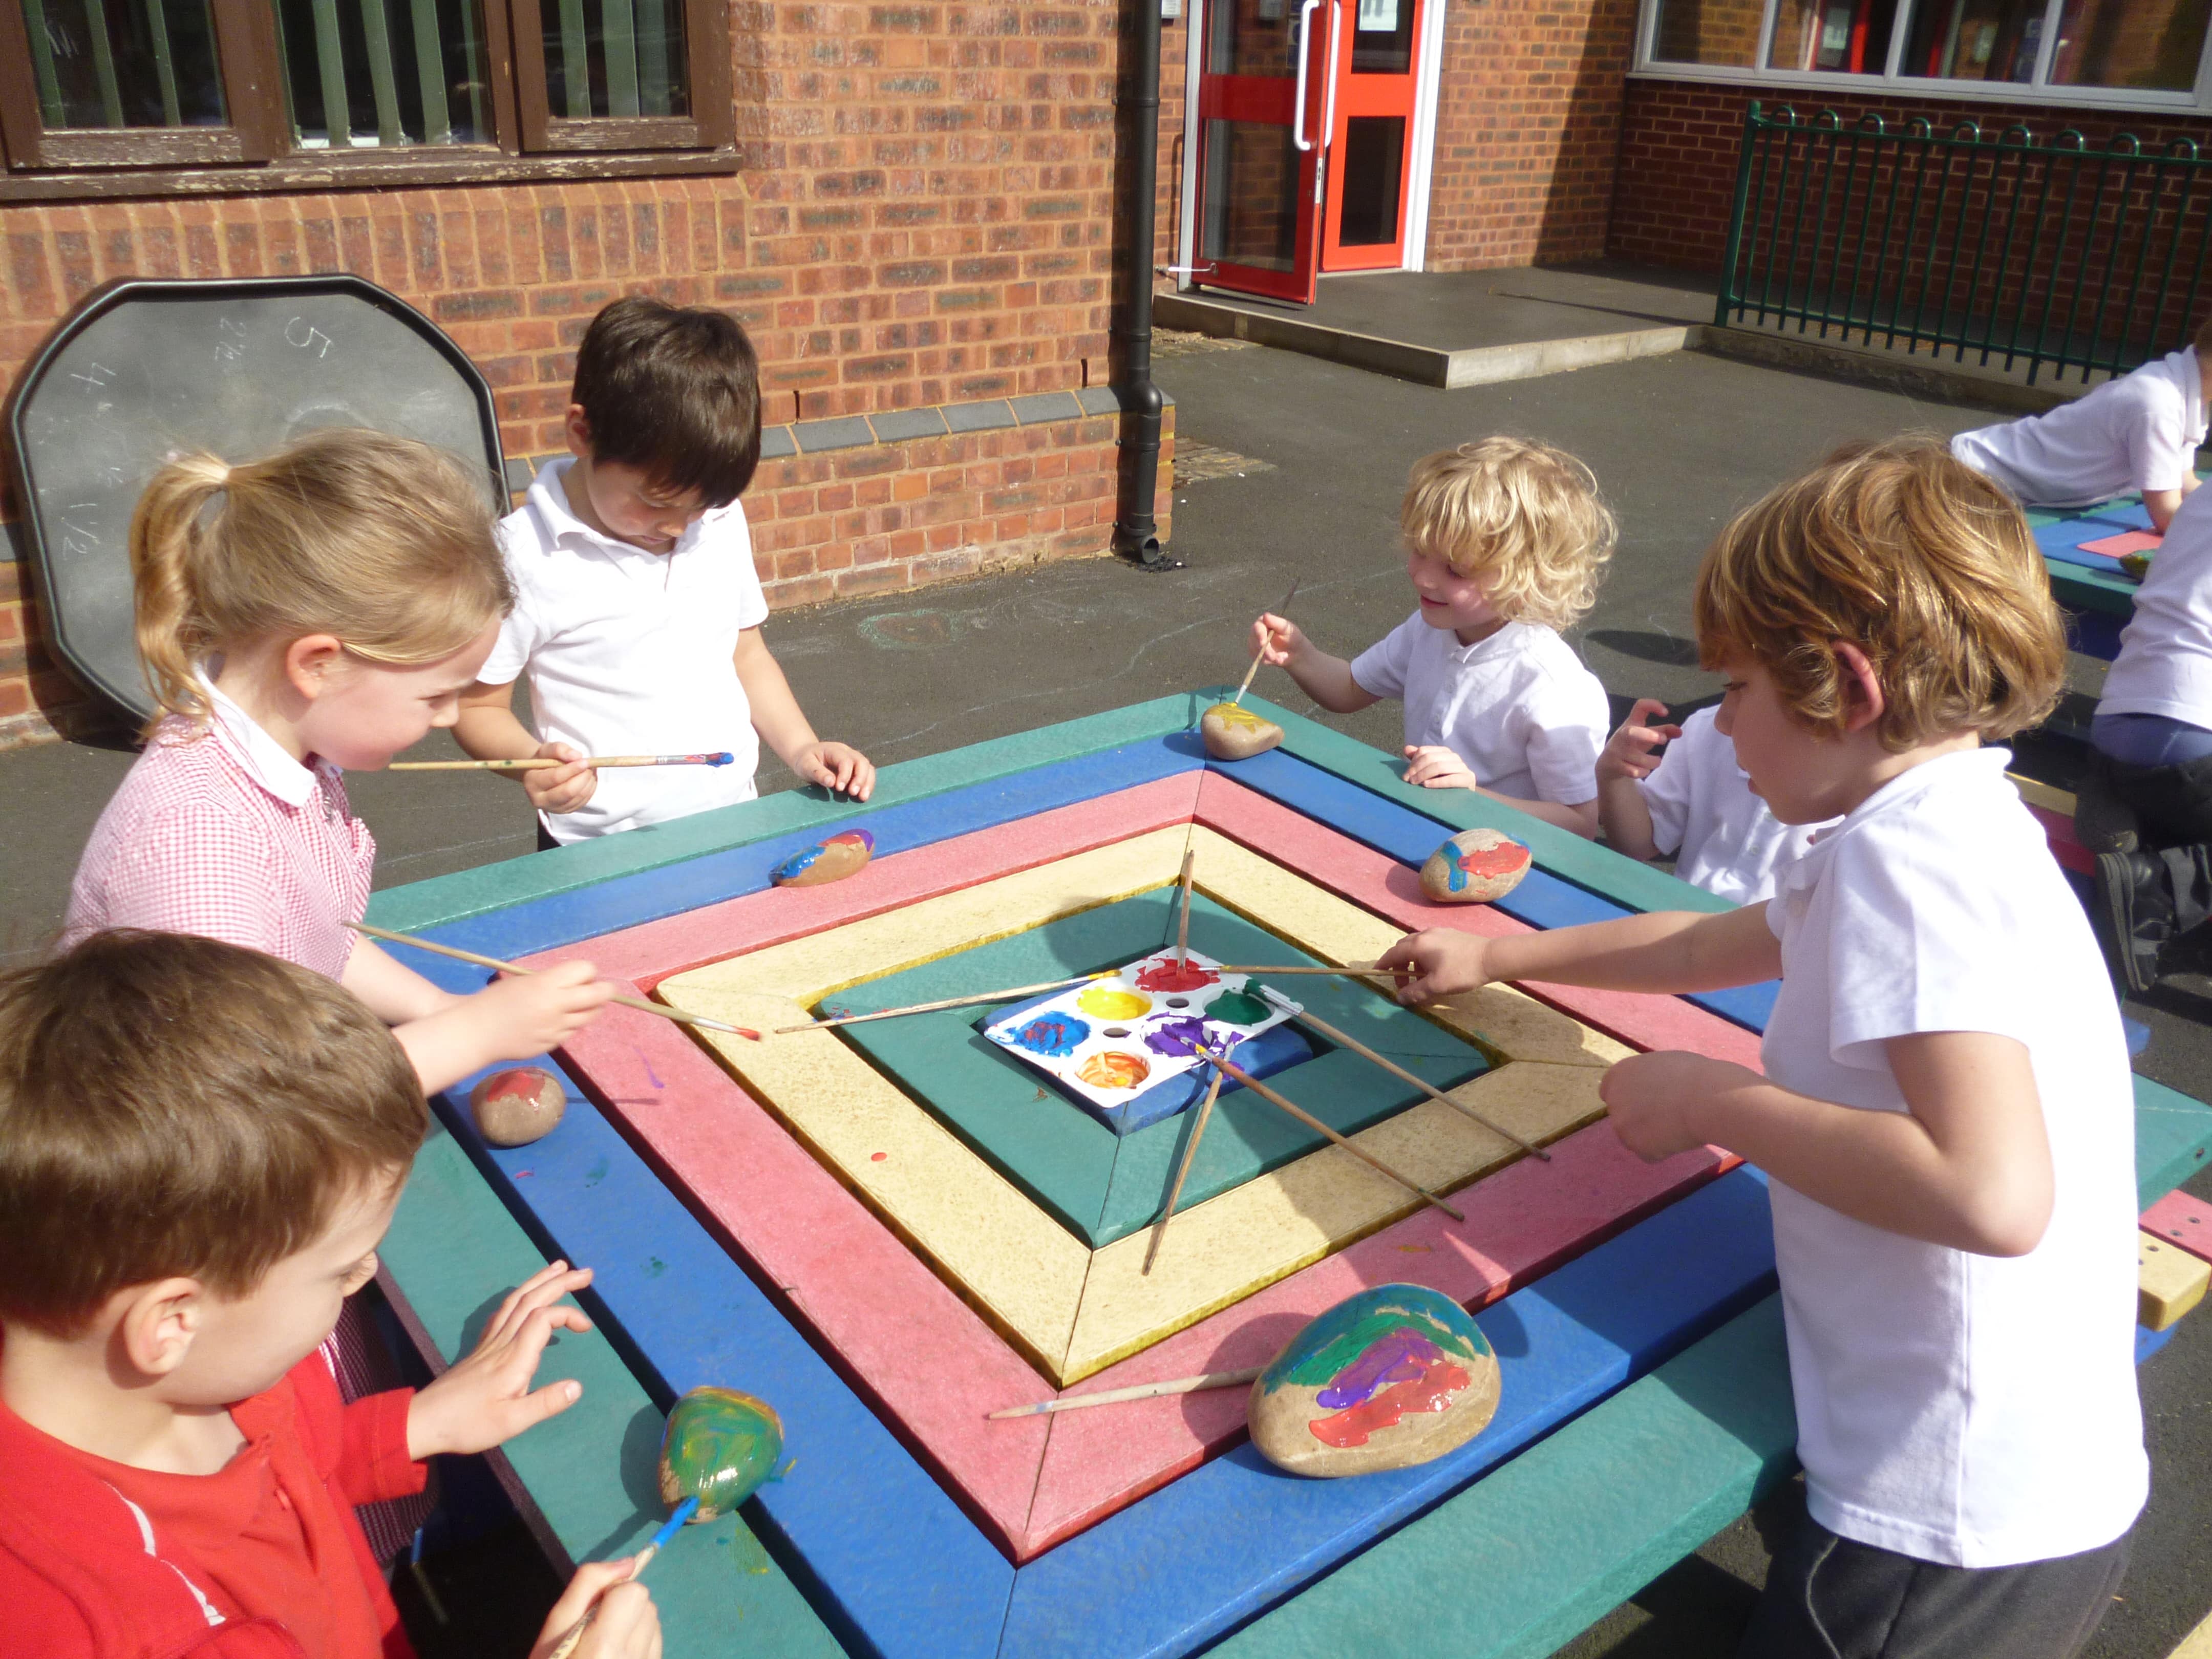 Year 2 pupils at the Richard Clarke First school